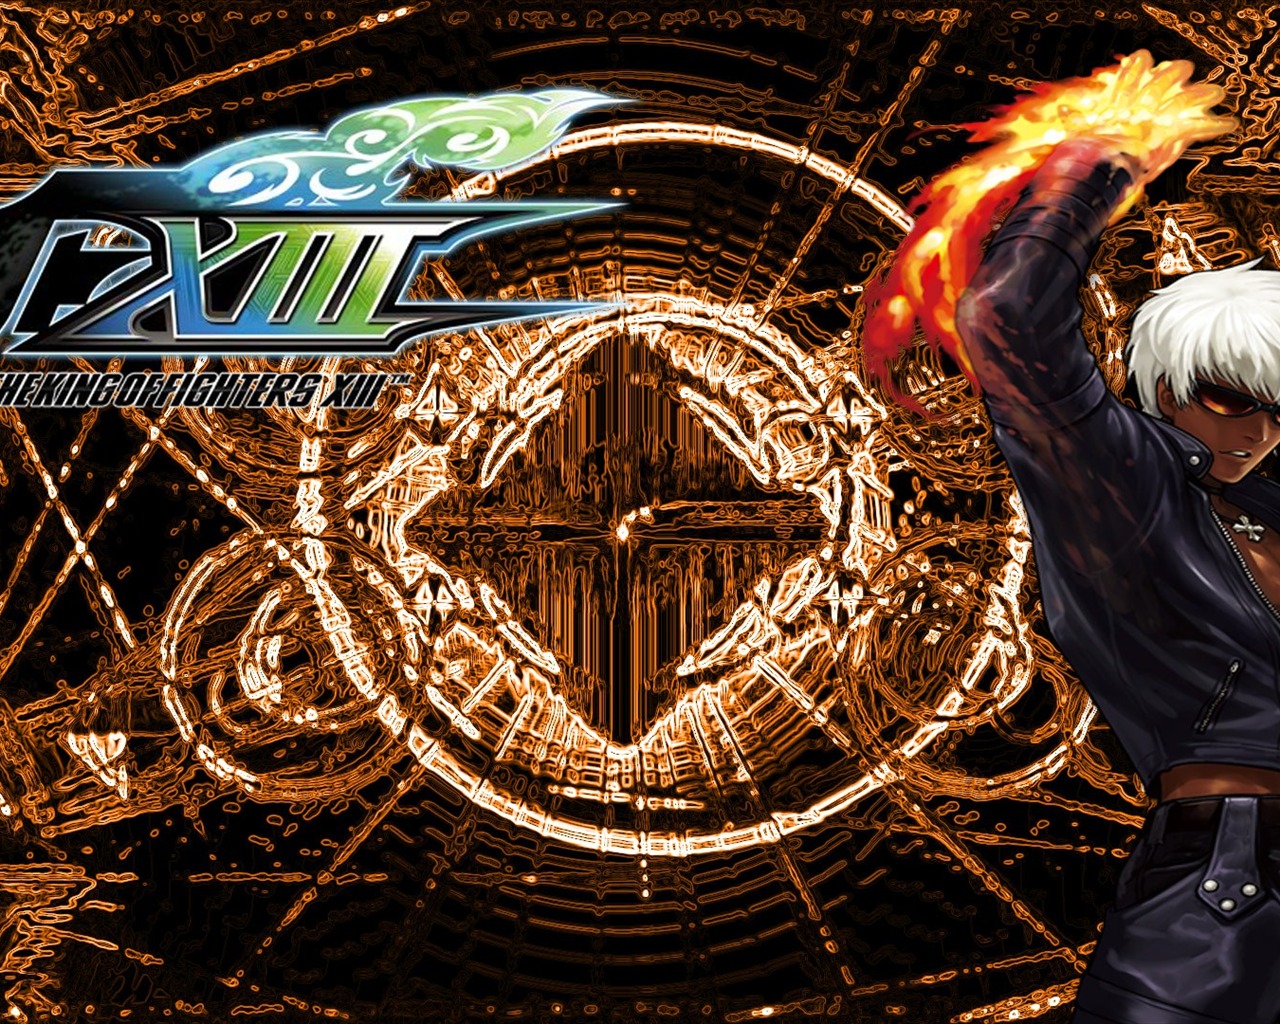 The King of Fighters XIII wallpapers #8 - 1280x1024